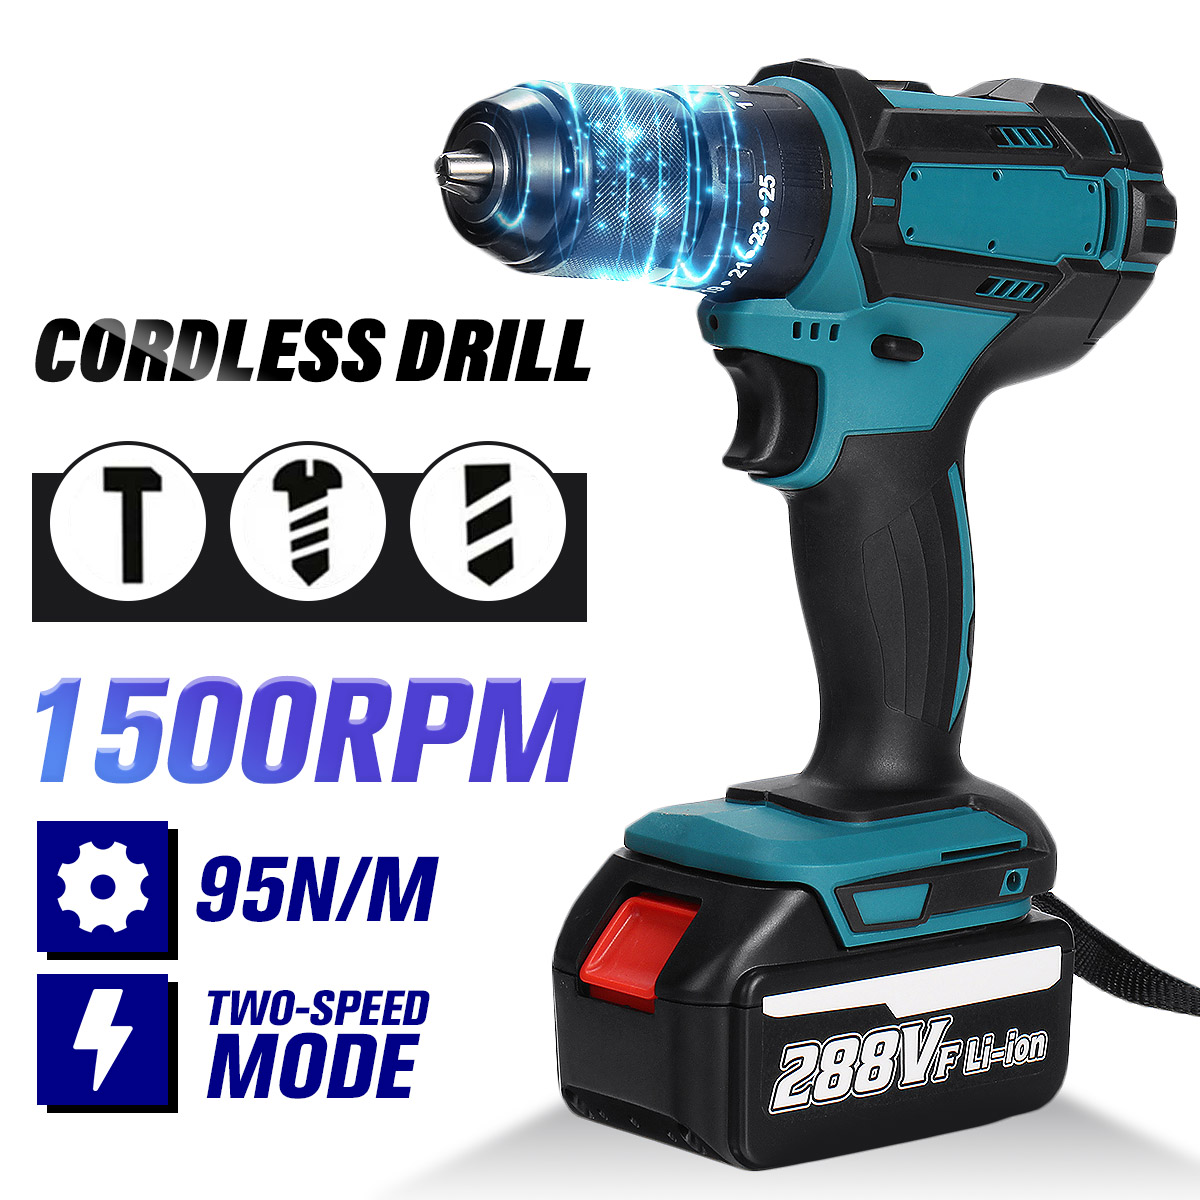 Wolike-13mm-800W-Cordless-Electirc-Impact-Drill-Driver-253-Torque-Electric-Drill-Screwdriver-1880979-2